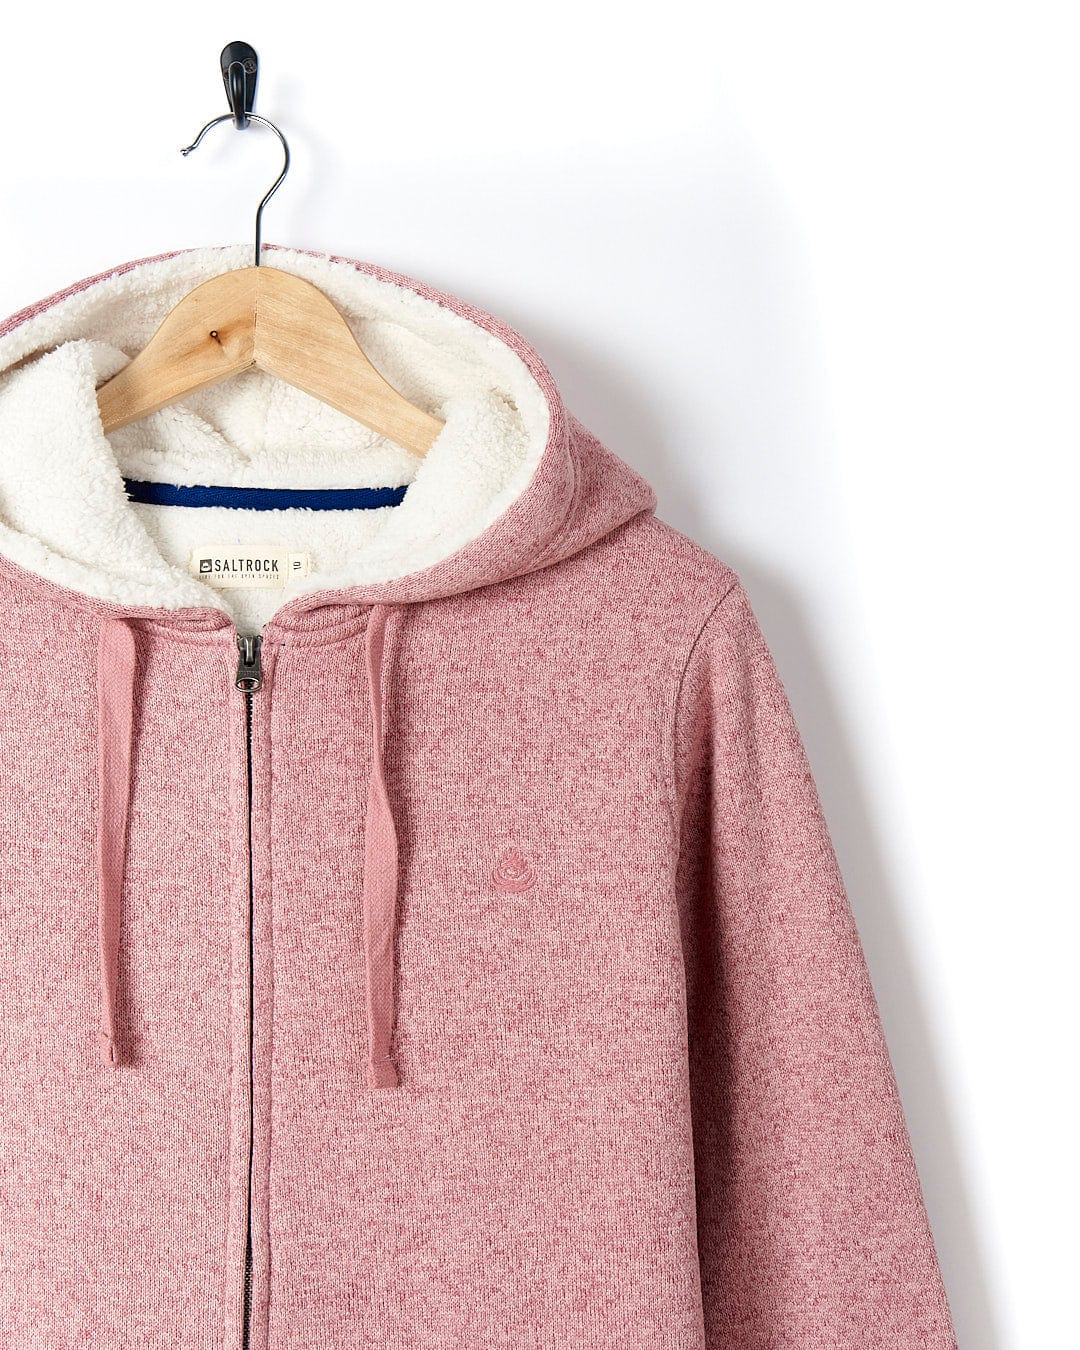 A cozy Galak - Womens Fur Lined Hoody - Pink by Saltrock hanging on a hanger.